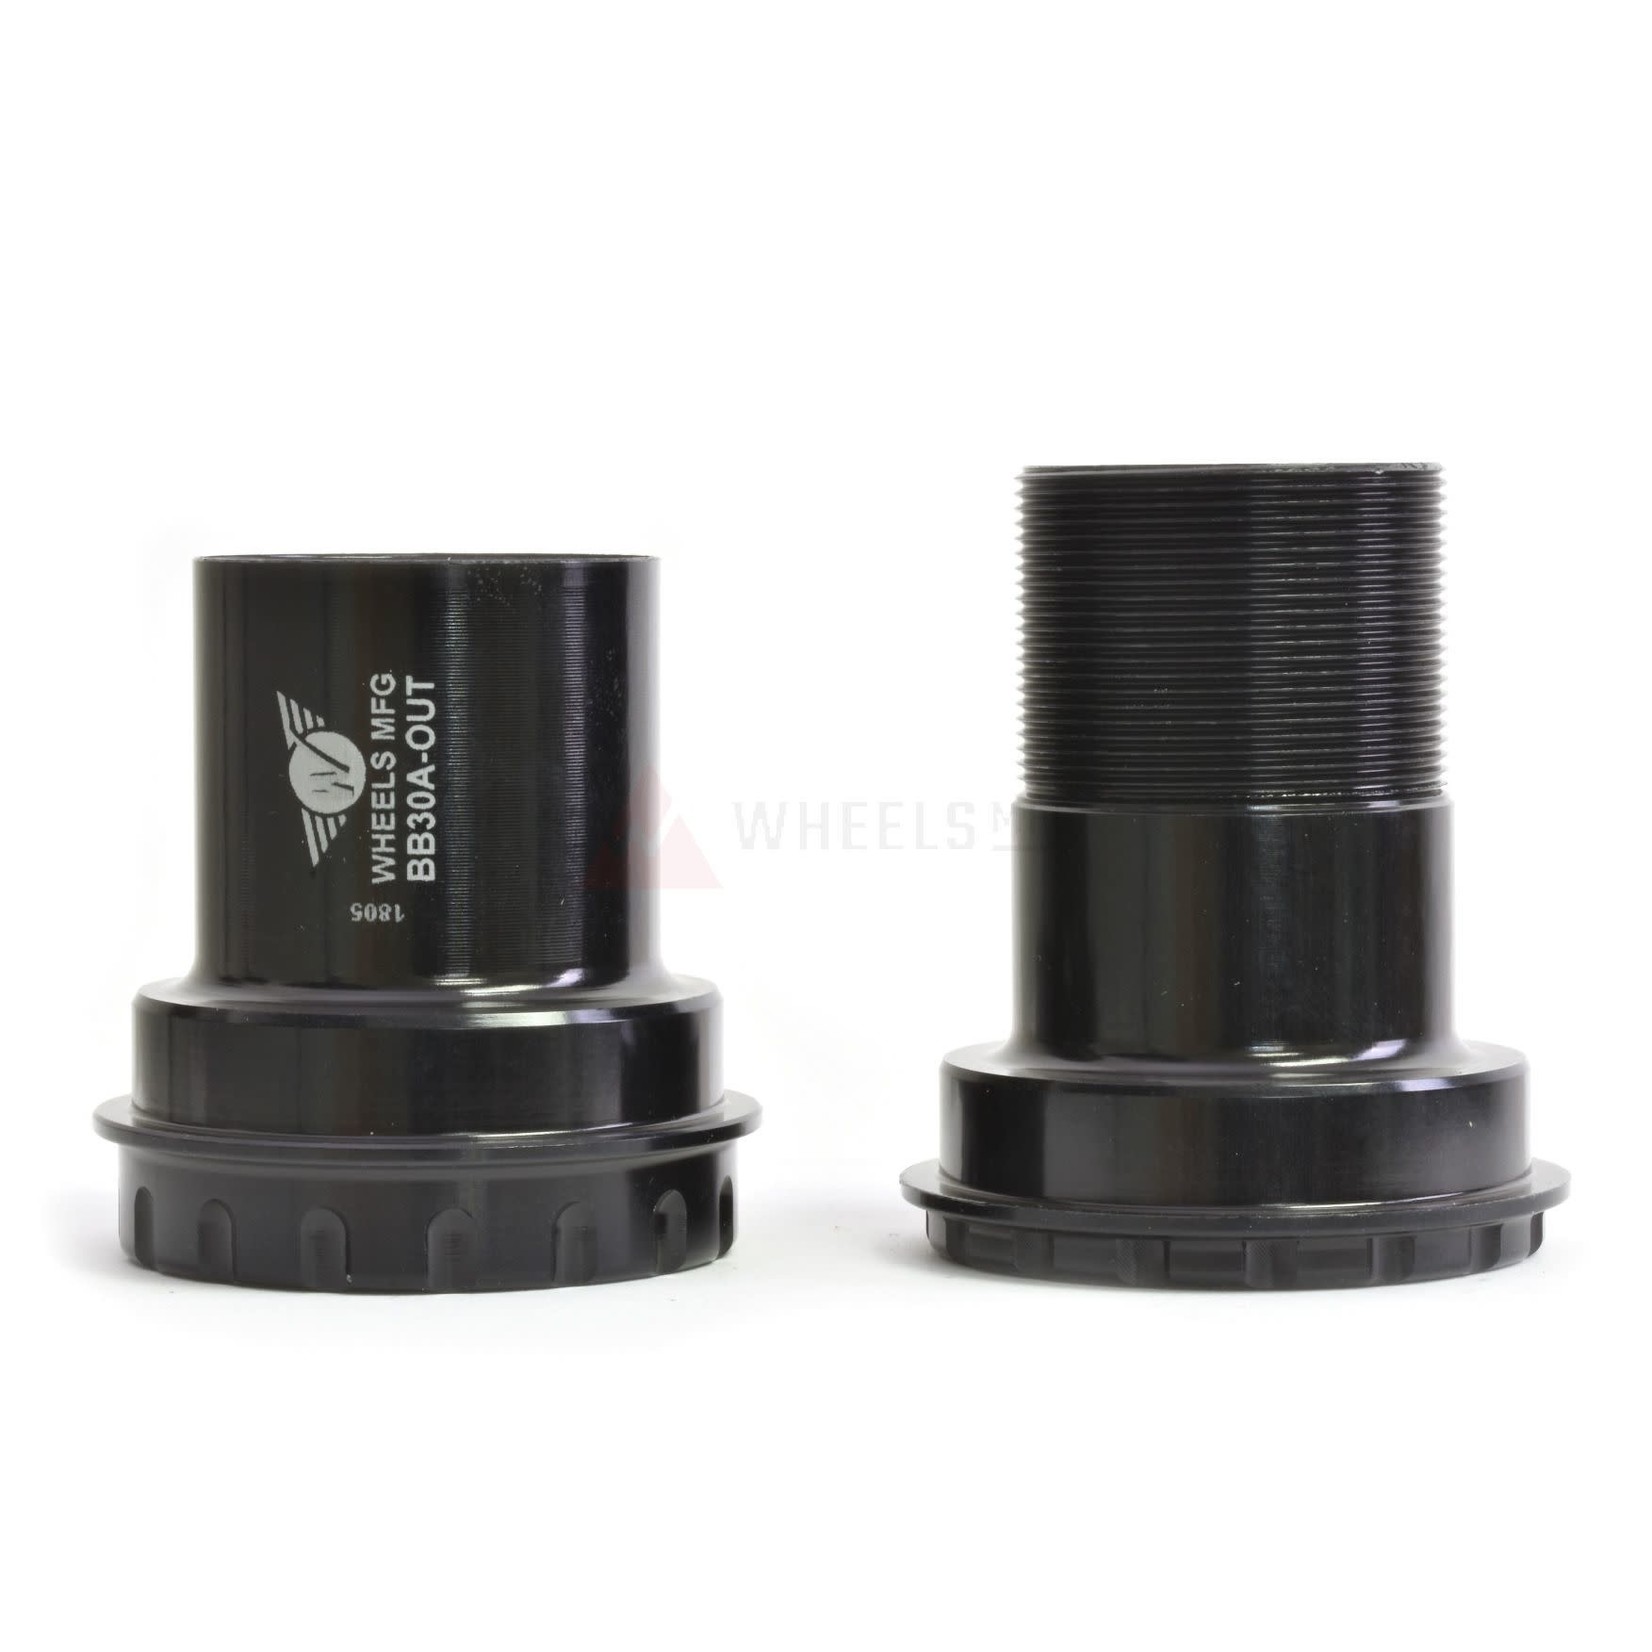 Wheels Manufacturing Wheels Mfg Bottom Bracket - BB30A Outboard ABEC-3 BB for 24mm Cranks (Shimano)